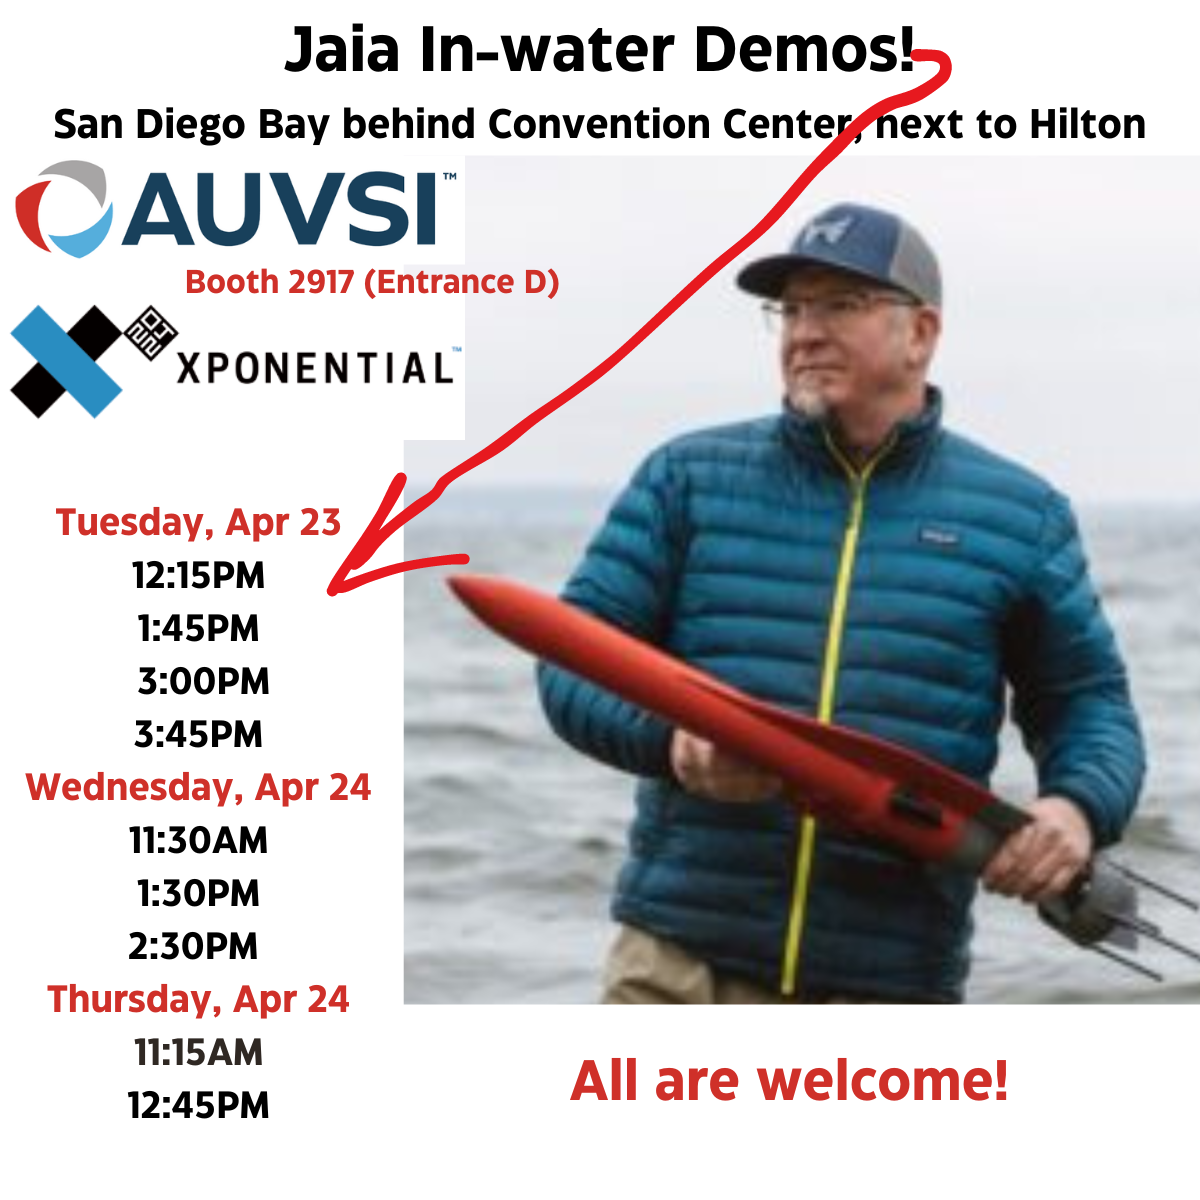 Ian holding JaiaBot with demo times for AUVSI Xponential